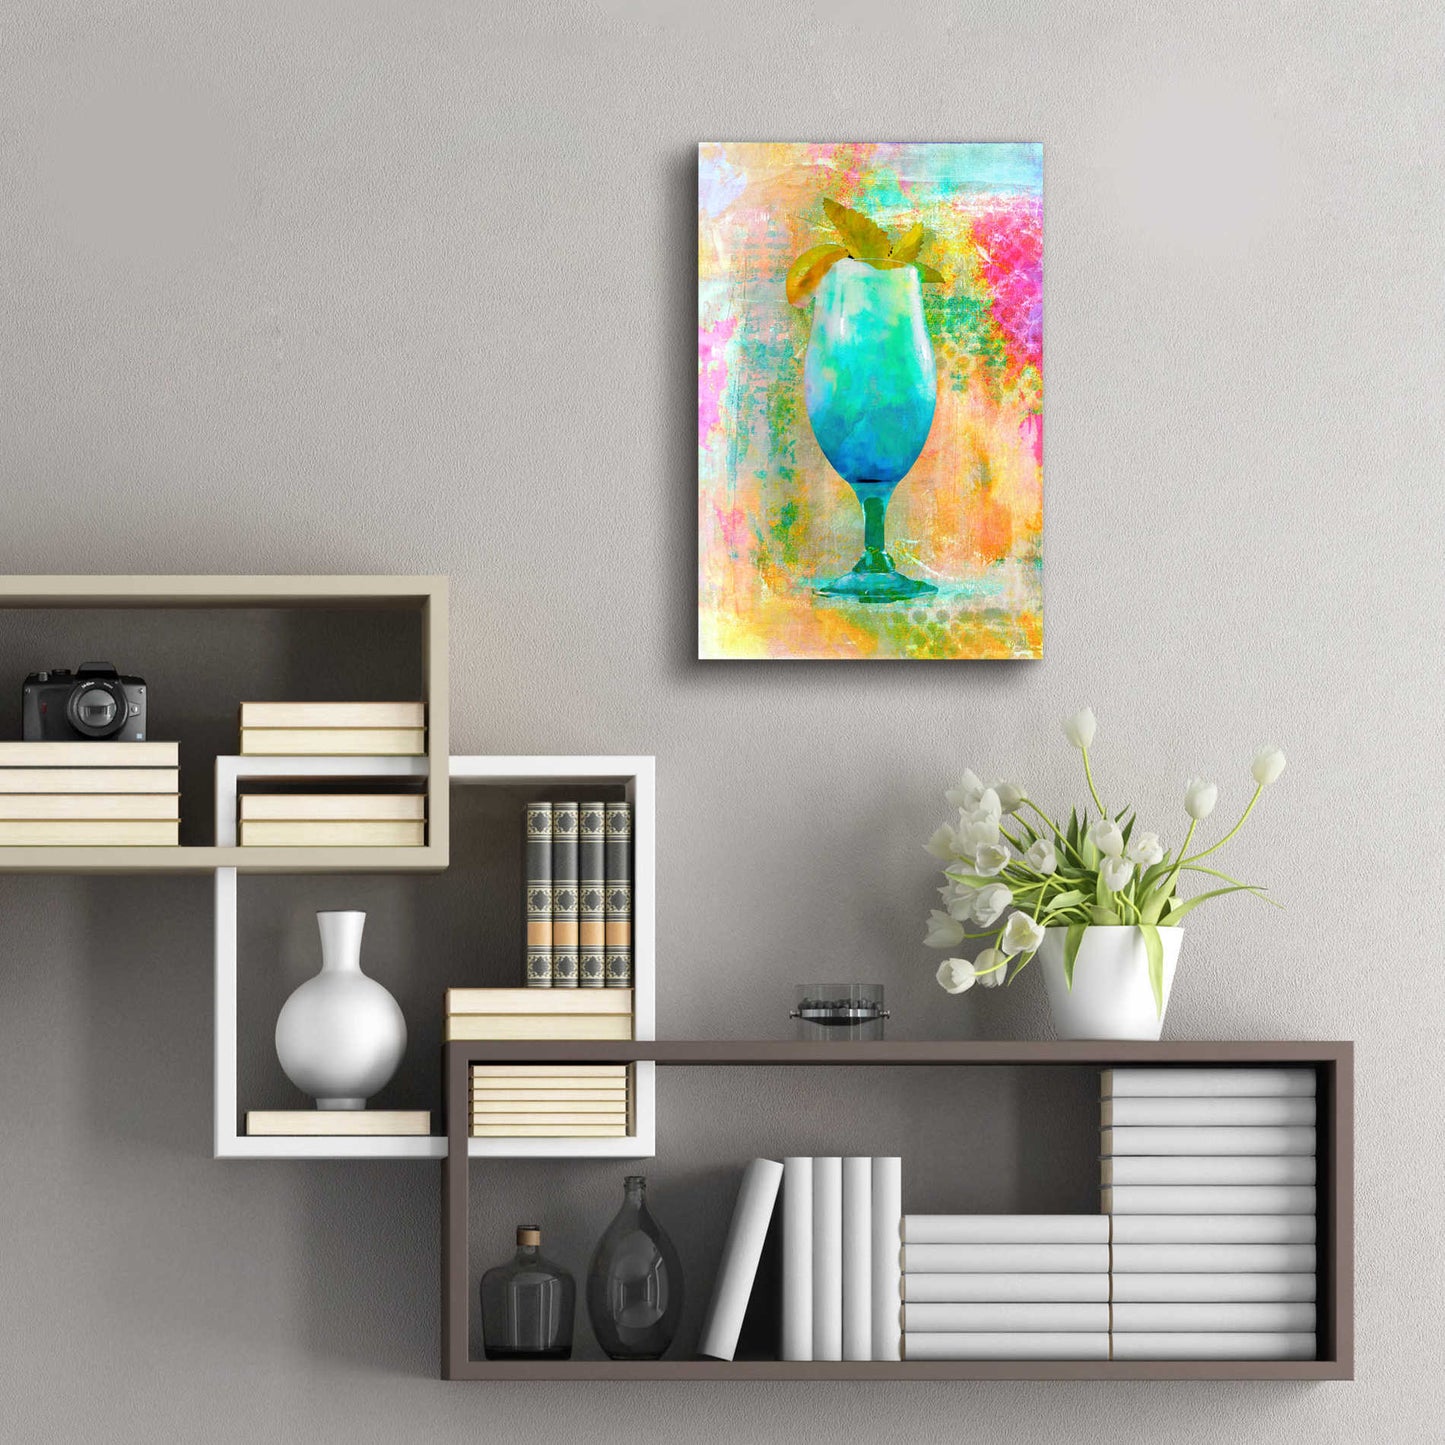 Epic Art 'Cocktail Night' by Andrea Haase Acrylic Glass Wall Art,16x24